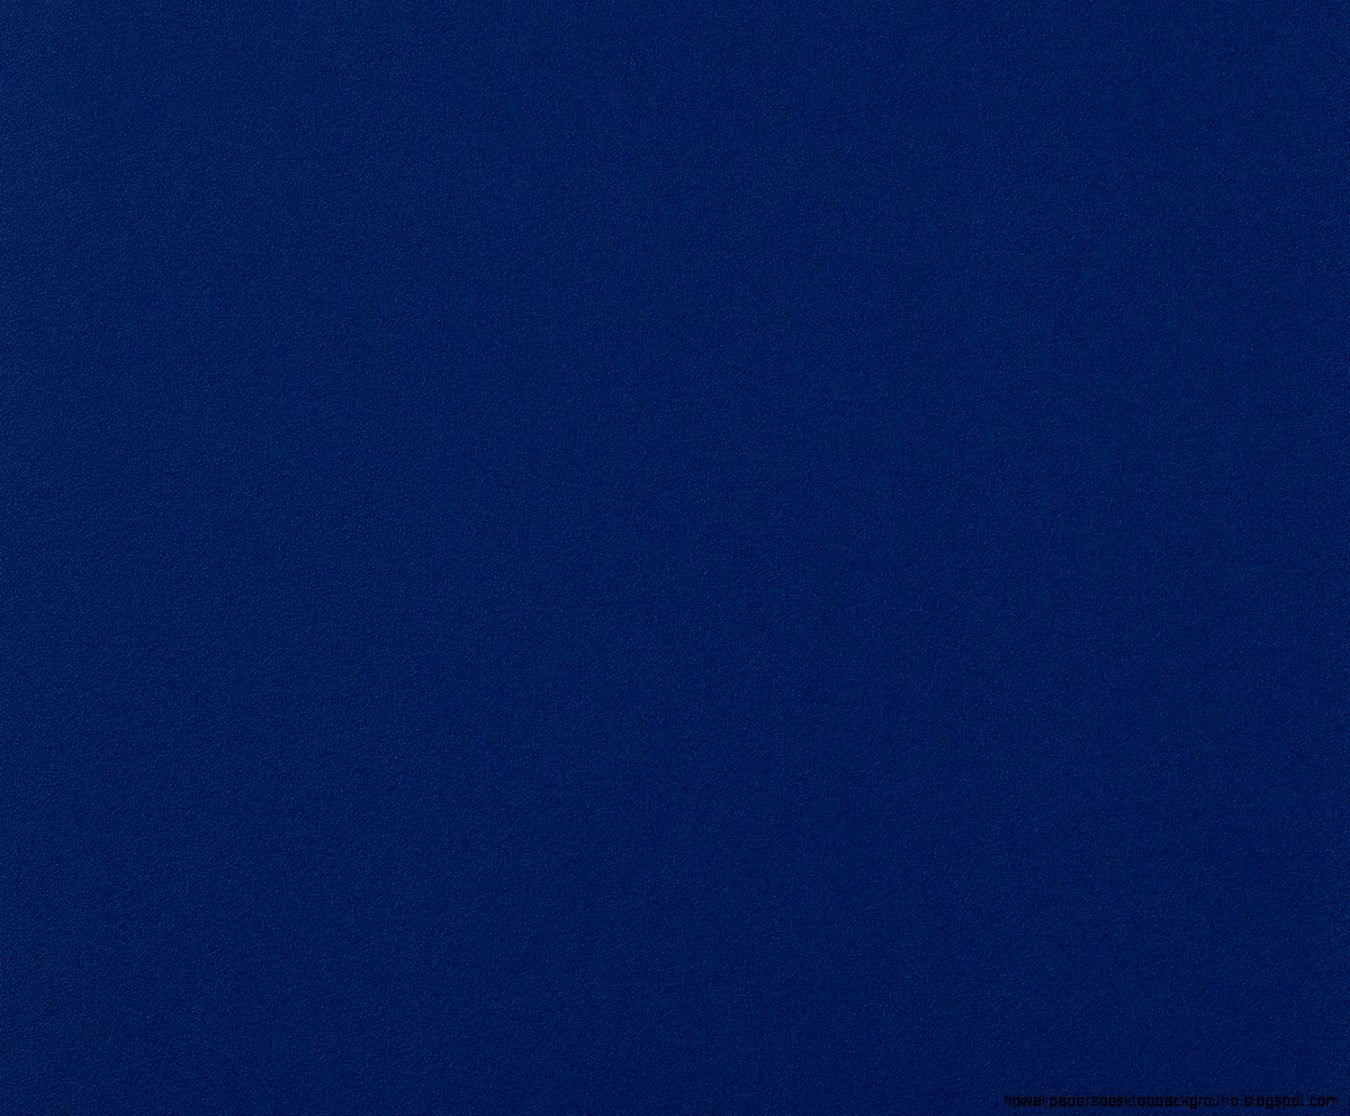 Plain Blue Wallpaper For Android HD Wallpapers Desktop Background